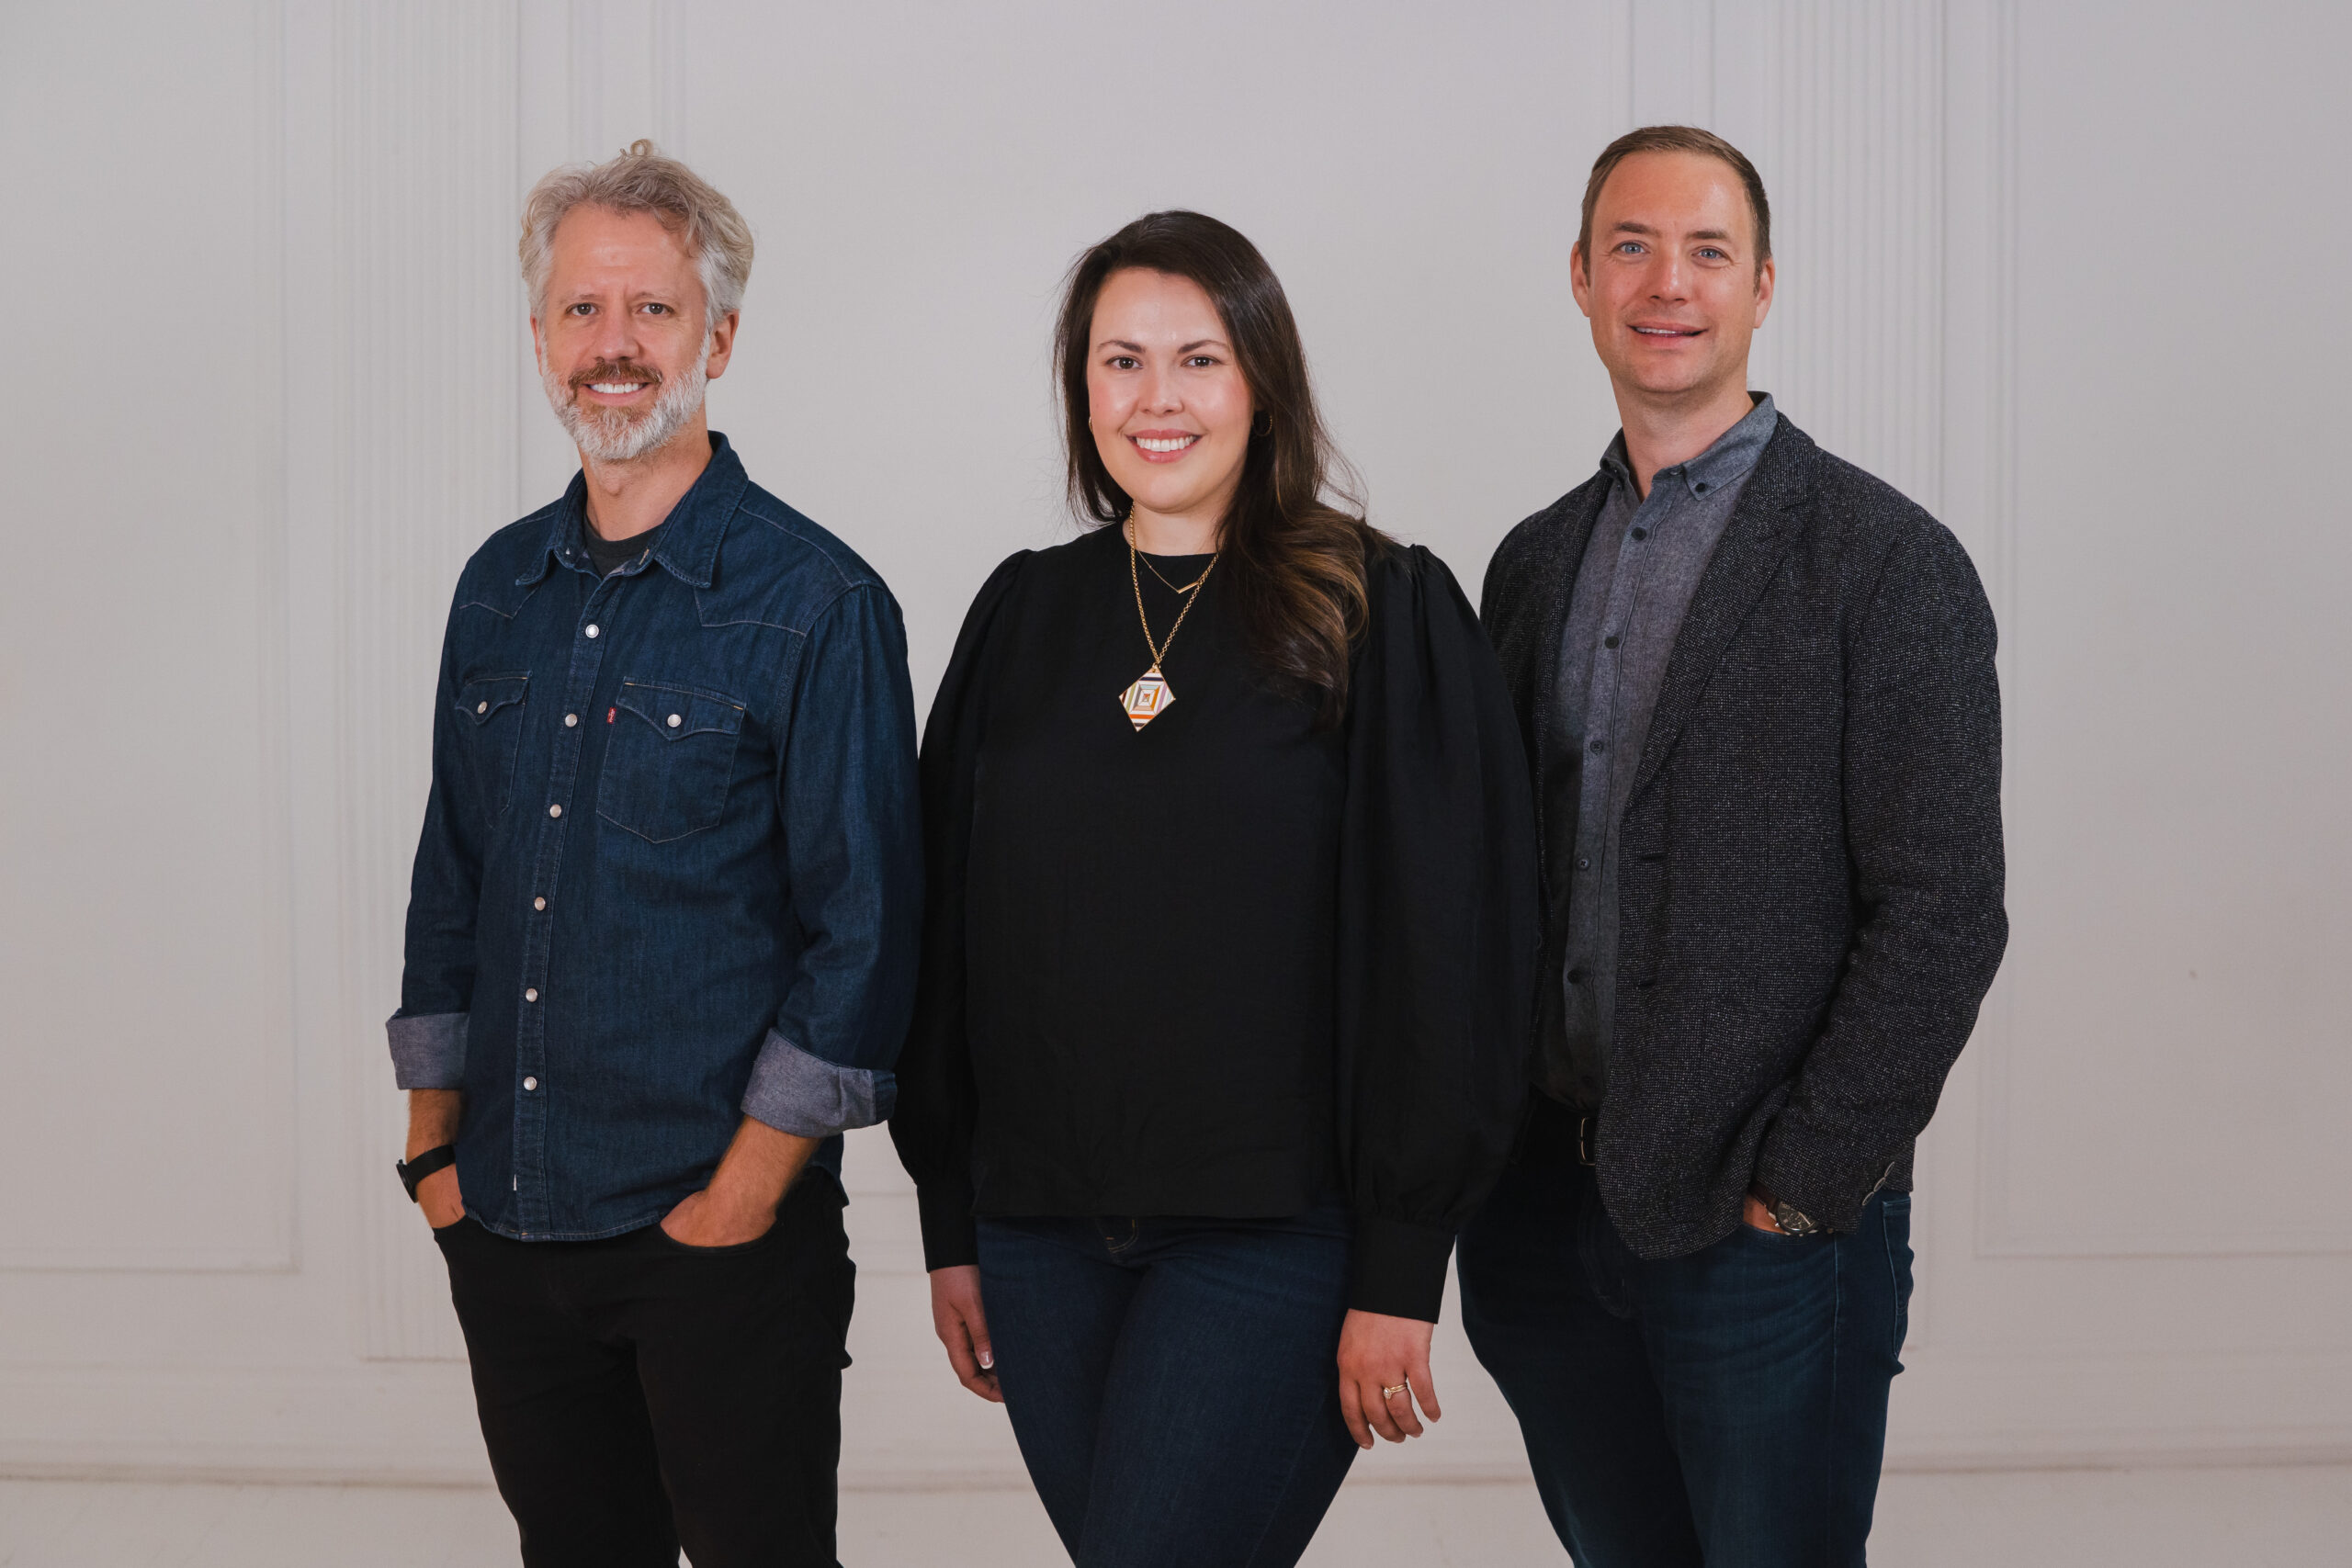 Photo of Founding Artistic Director, Joel Ivany, General Director Robin Whiffen, and Chair of the Board of Directors March Chalifoux. They are all standing together smiling in front of a white wall. Joel is a white man with grey heard and beard. He is wearing a denim shirt and black pants. Robin is a White woman with shoulder-length brown hair. She is wearing all black and a pendant necklace. Marc Chalifoux is a white man with short blond hair. He is wearing a blue shirt underneath a black blazer and with black pants.